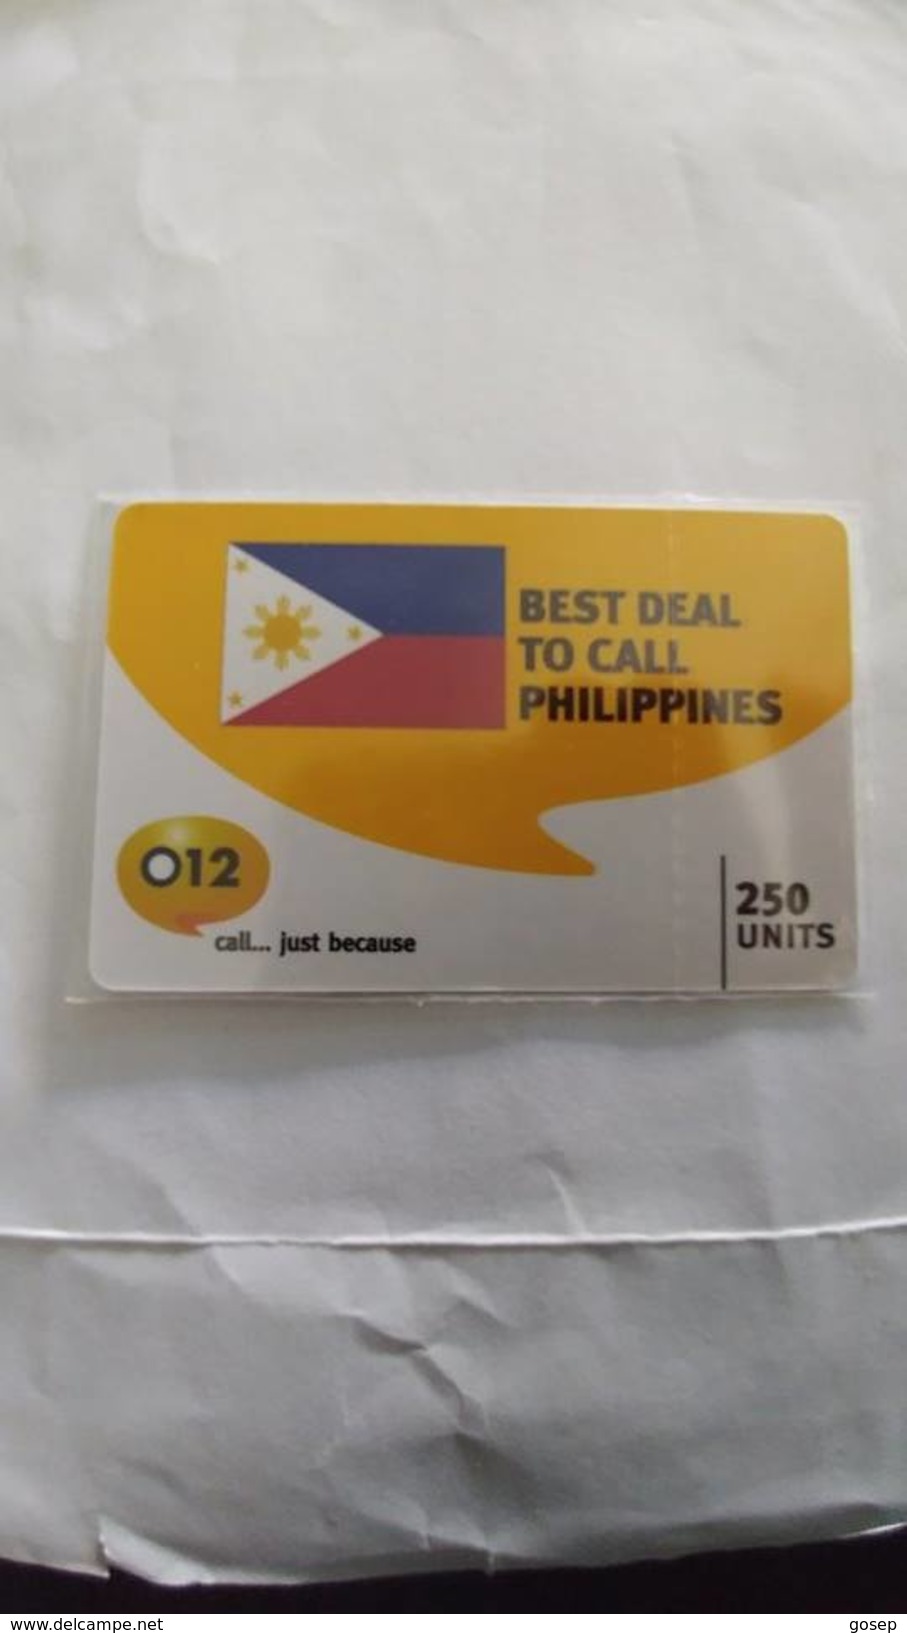 Israel-best Deal To Call Philippines-(1)-zabra-(250units)-(012call Just Because)-(1.5.2008)-mint Card - Filippine